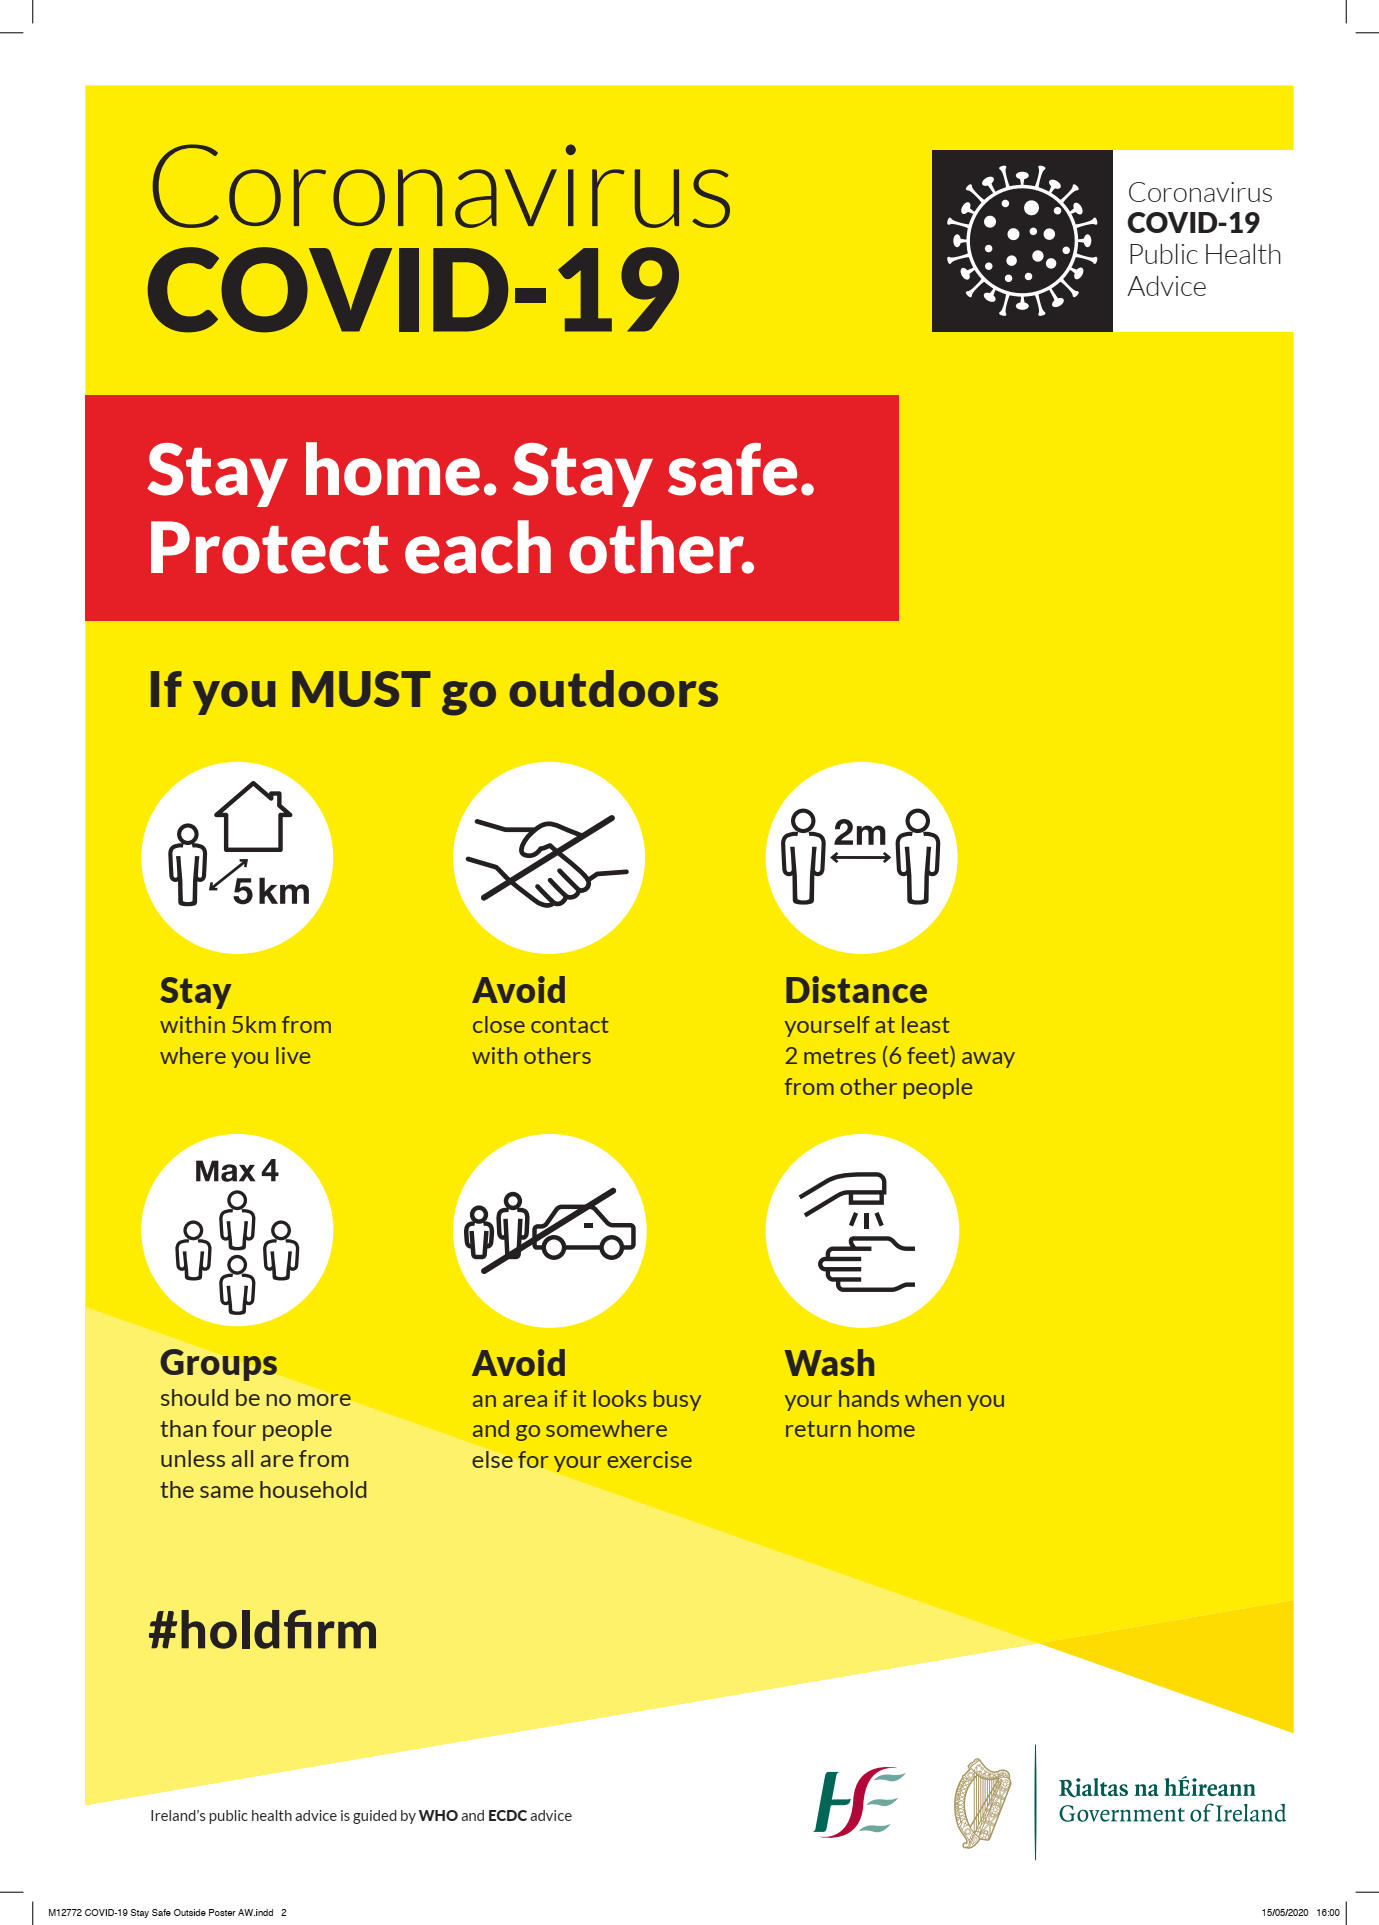 Covid 19 Phase 1 stay safe outside poster describing social distancing rules, groups of 4 or less, stay within 5km of home, avid the area if busy and to always wash your hands